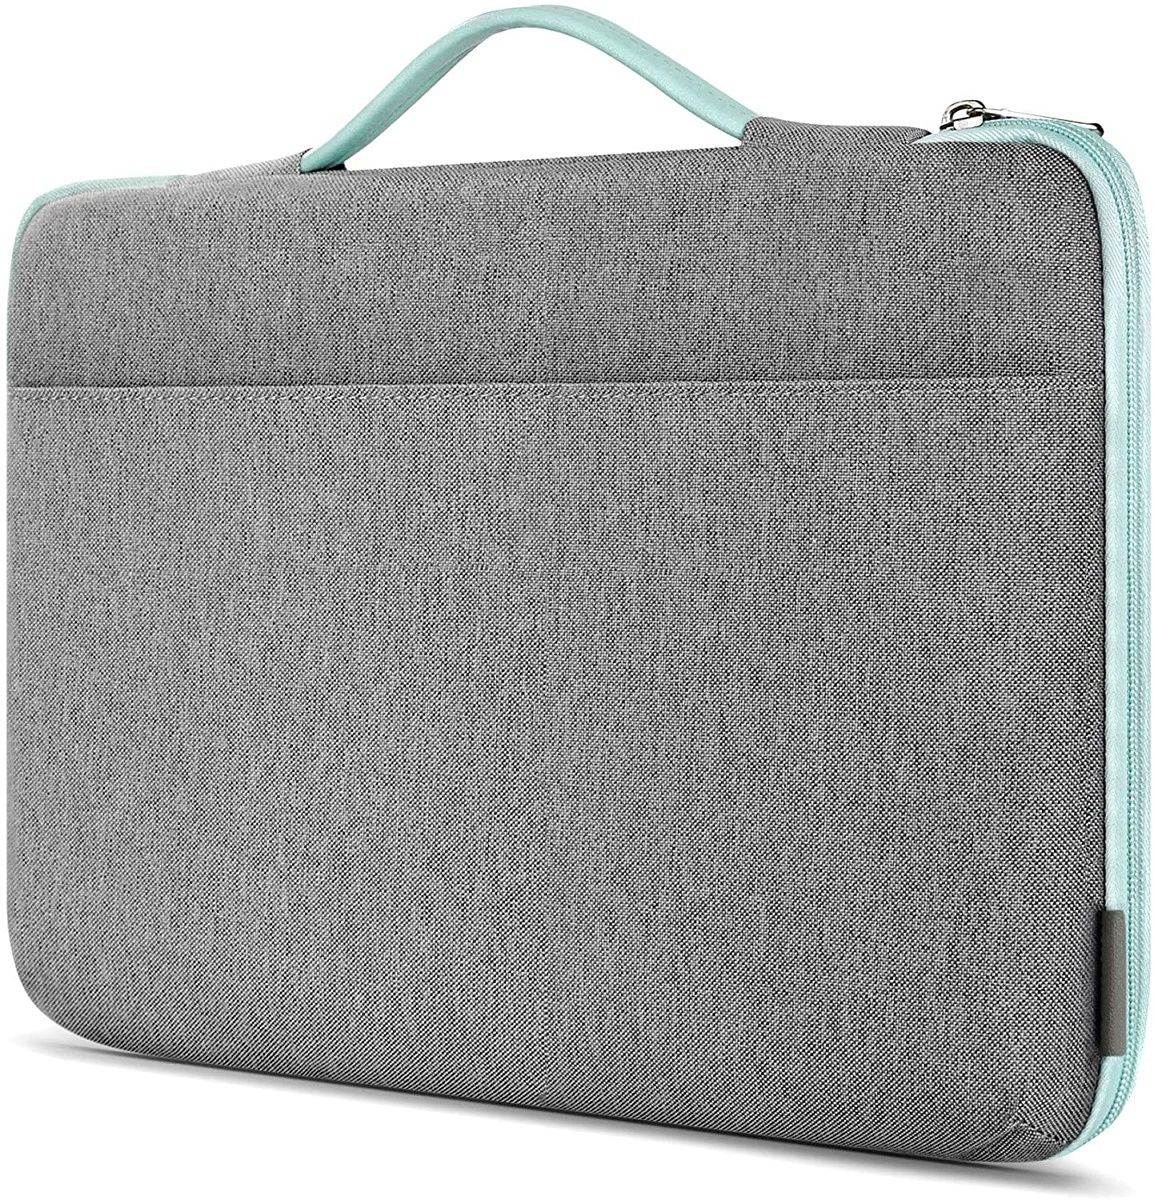 Looking for basic protection that still looks great? This Inateck sleeve is exactly that, with a clean design that still keeps your laptop safe from everyday bumps, and it gives you some space for accessories.